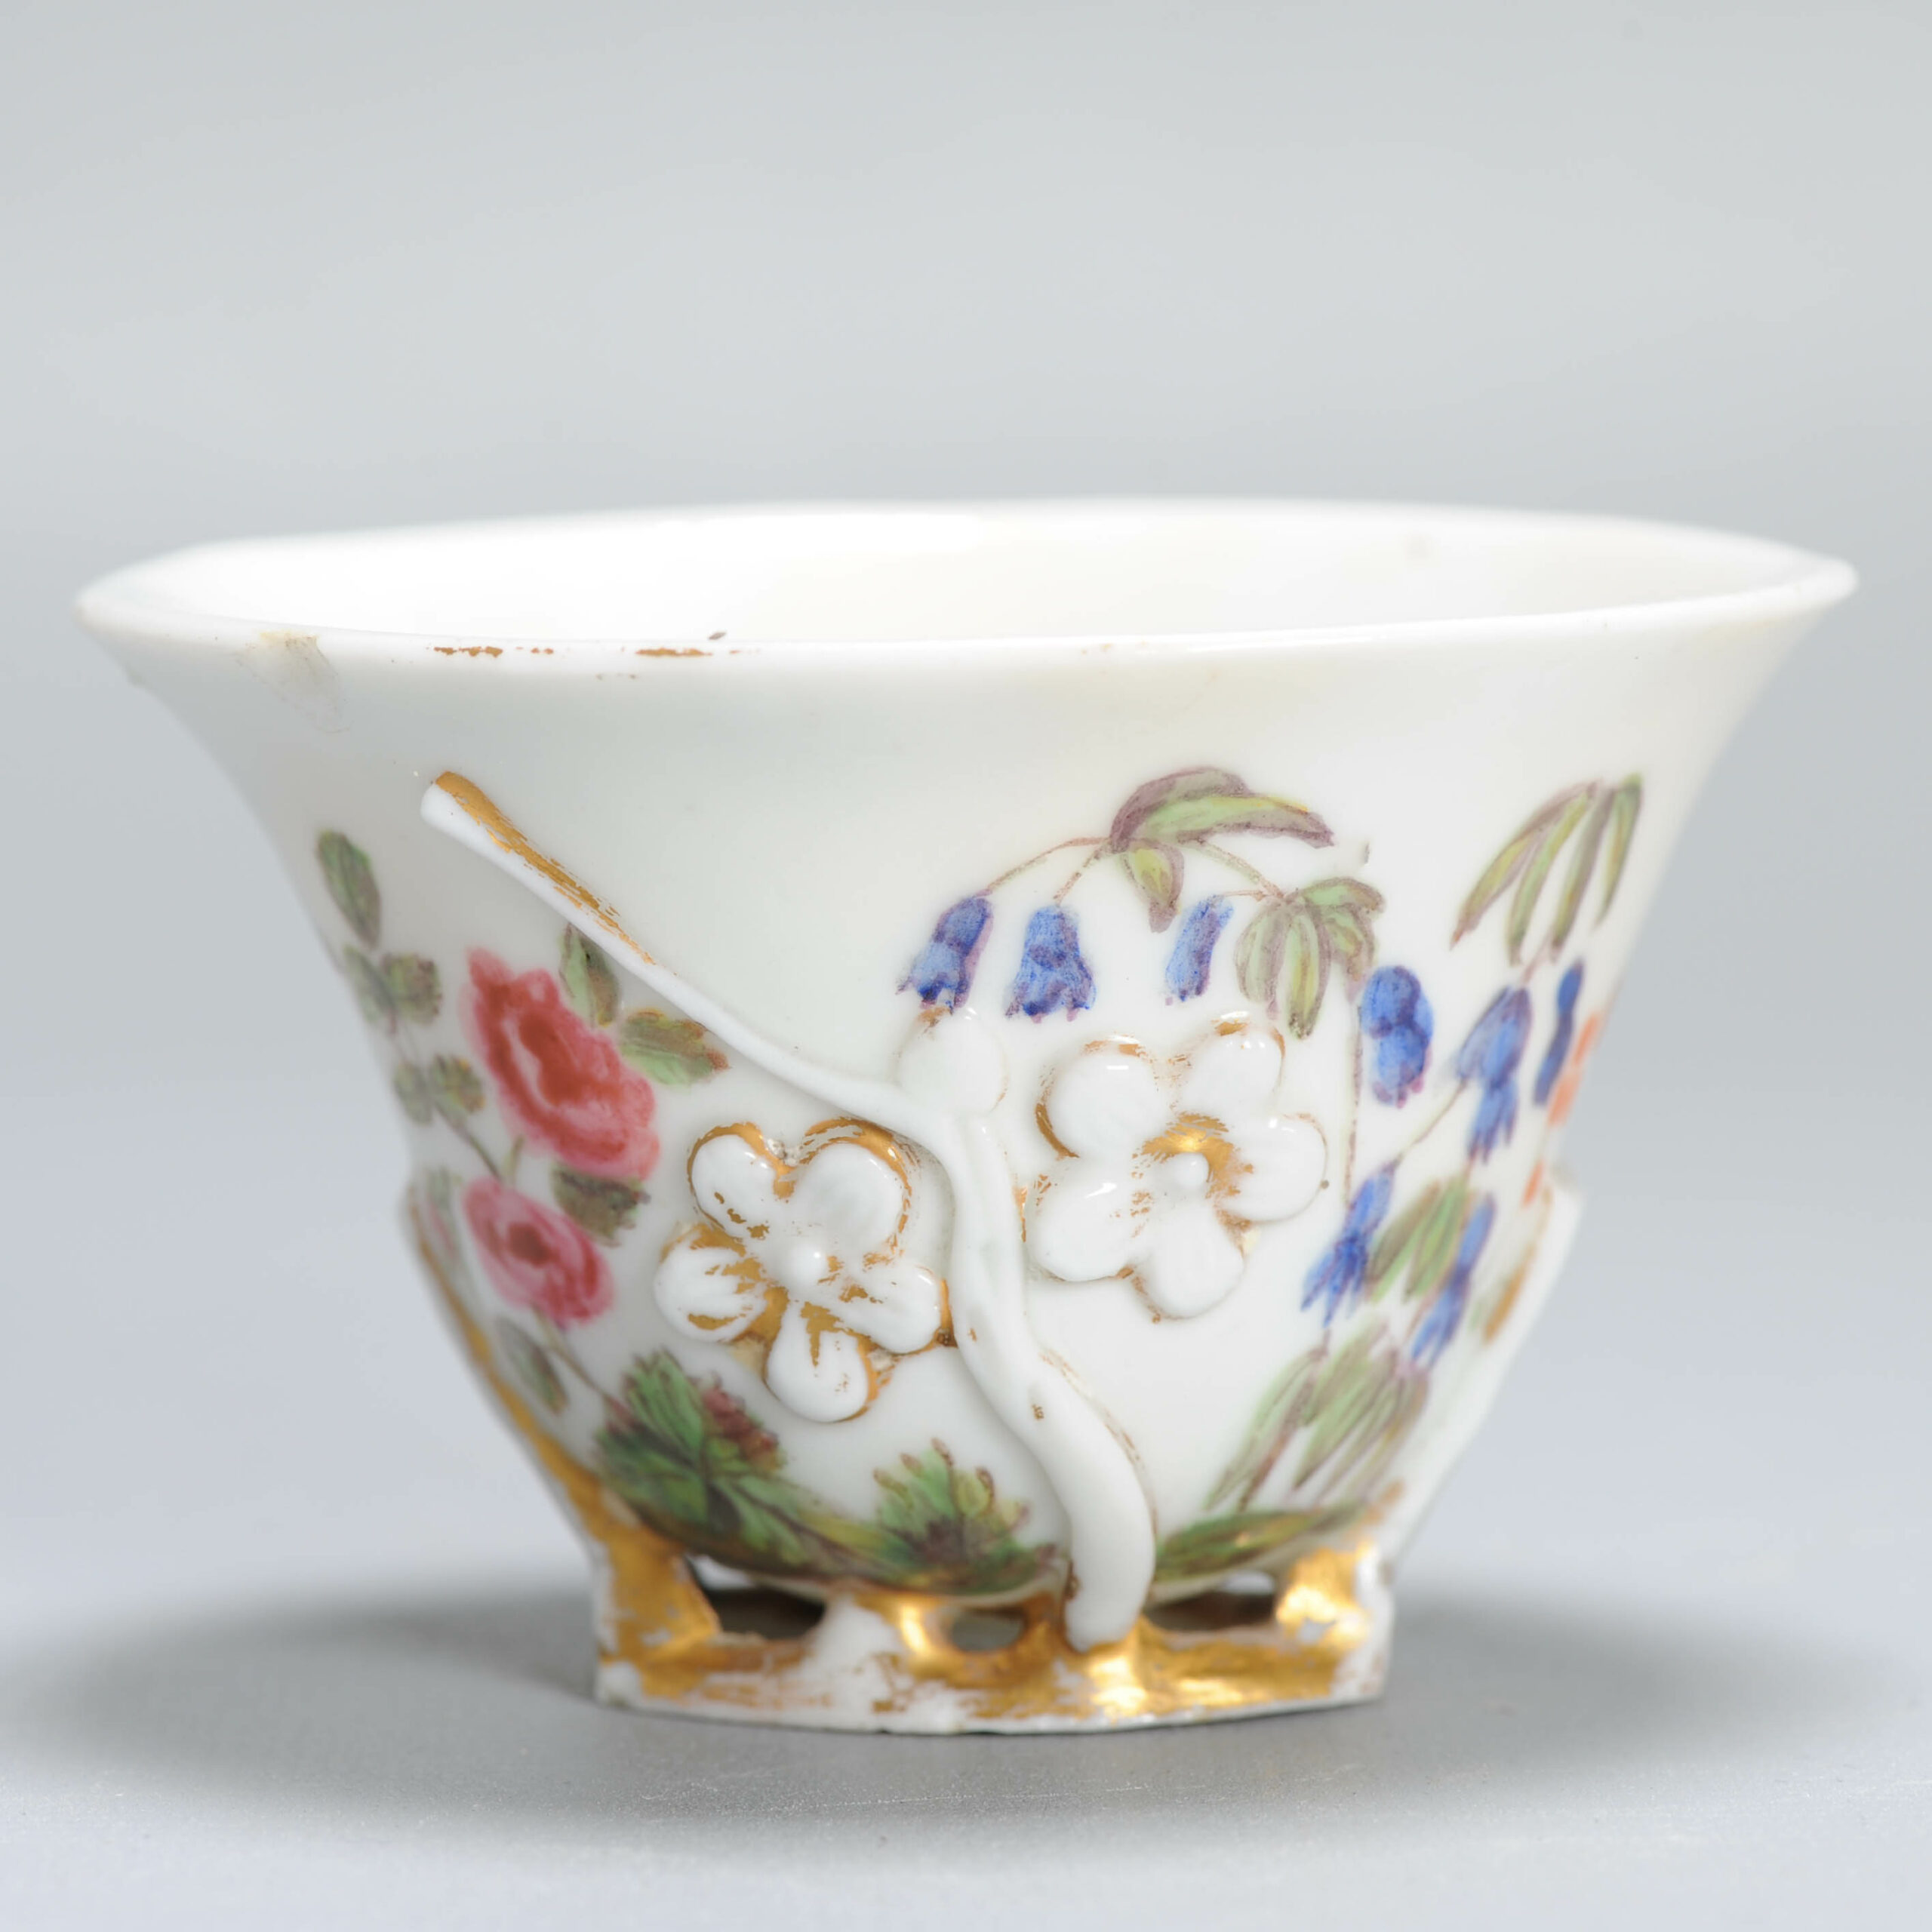 1355 Antique 17th C Chinese Cup Dehua Blanc de Chine Libation Cup. Redecorated in Europe. Most Likely in the UK